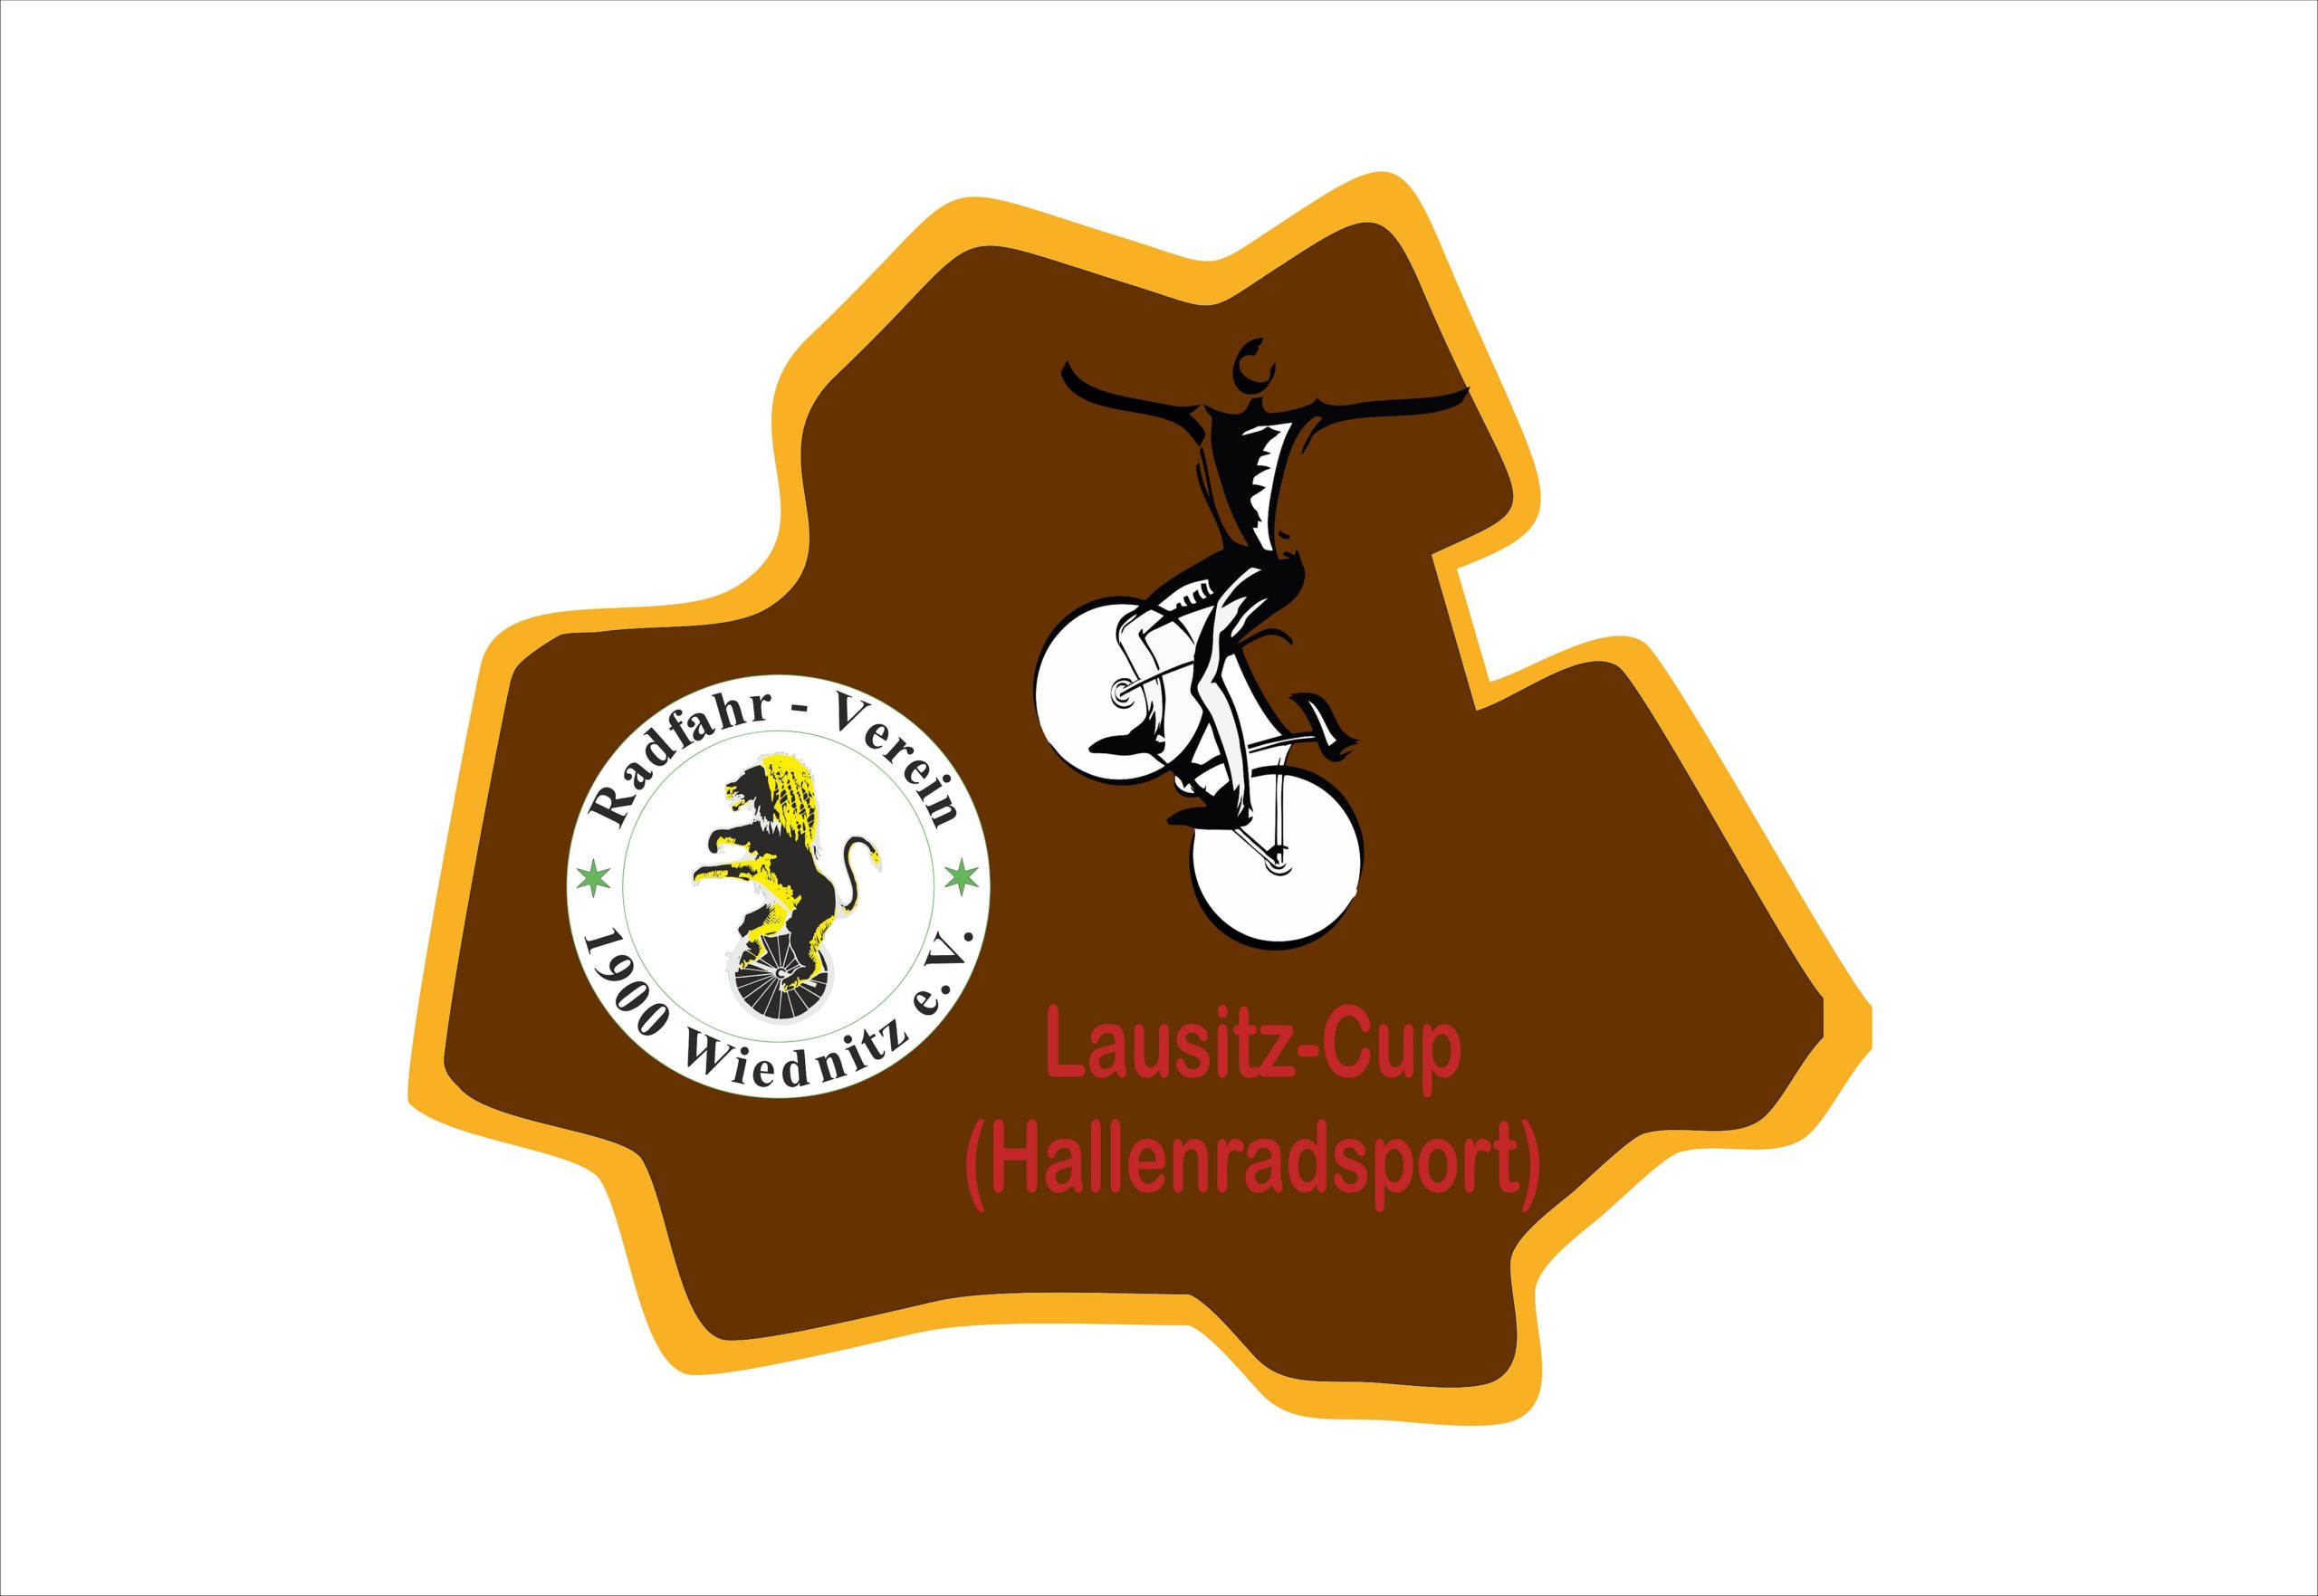 Lausitz-Cup_v2_small2